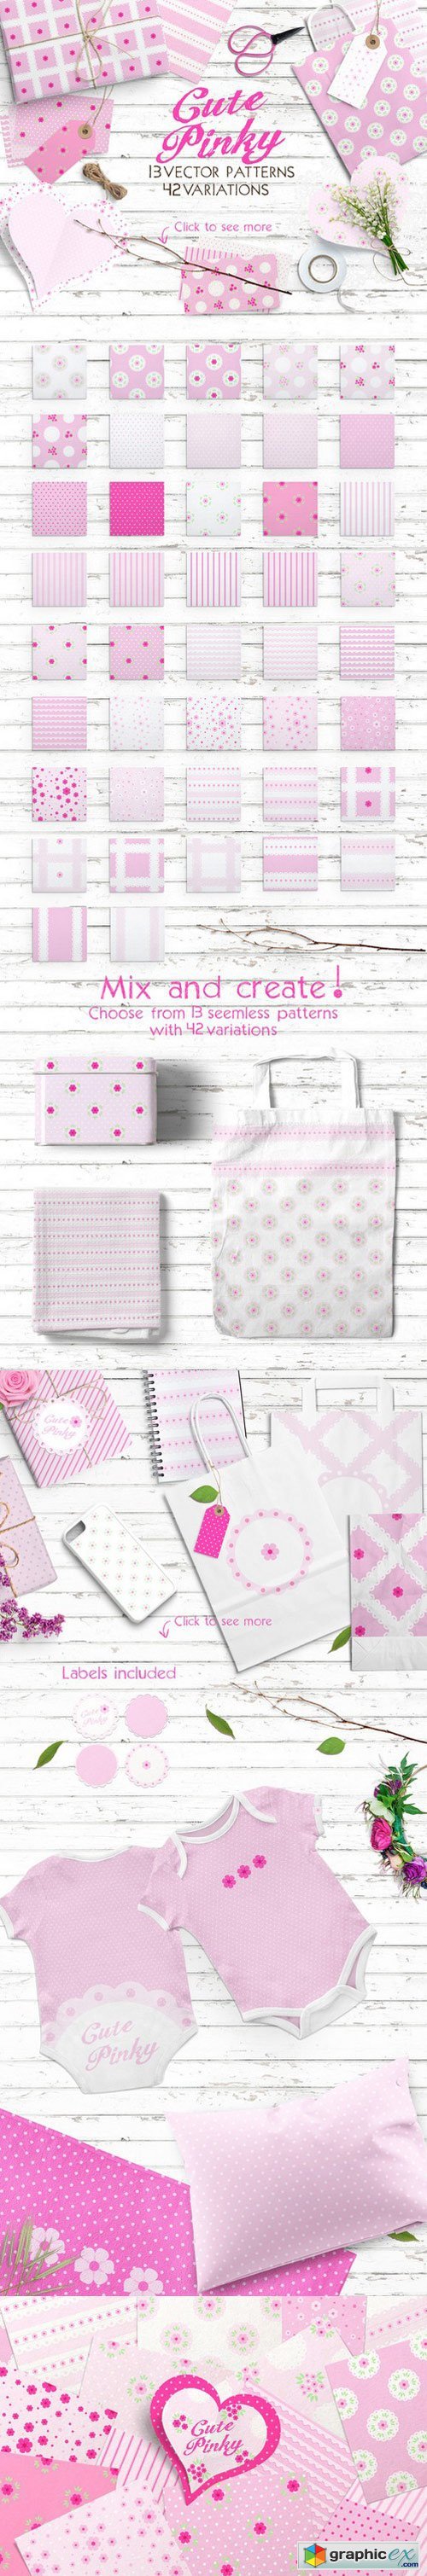 Cute Pinky Patterns Pack